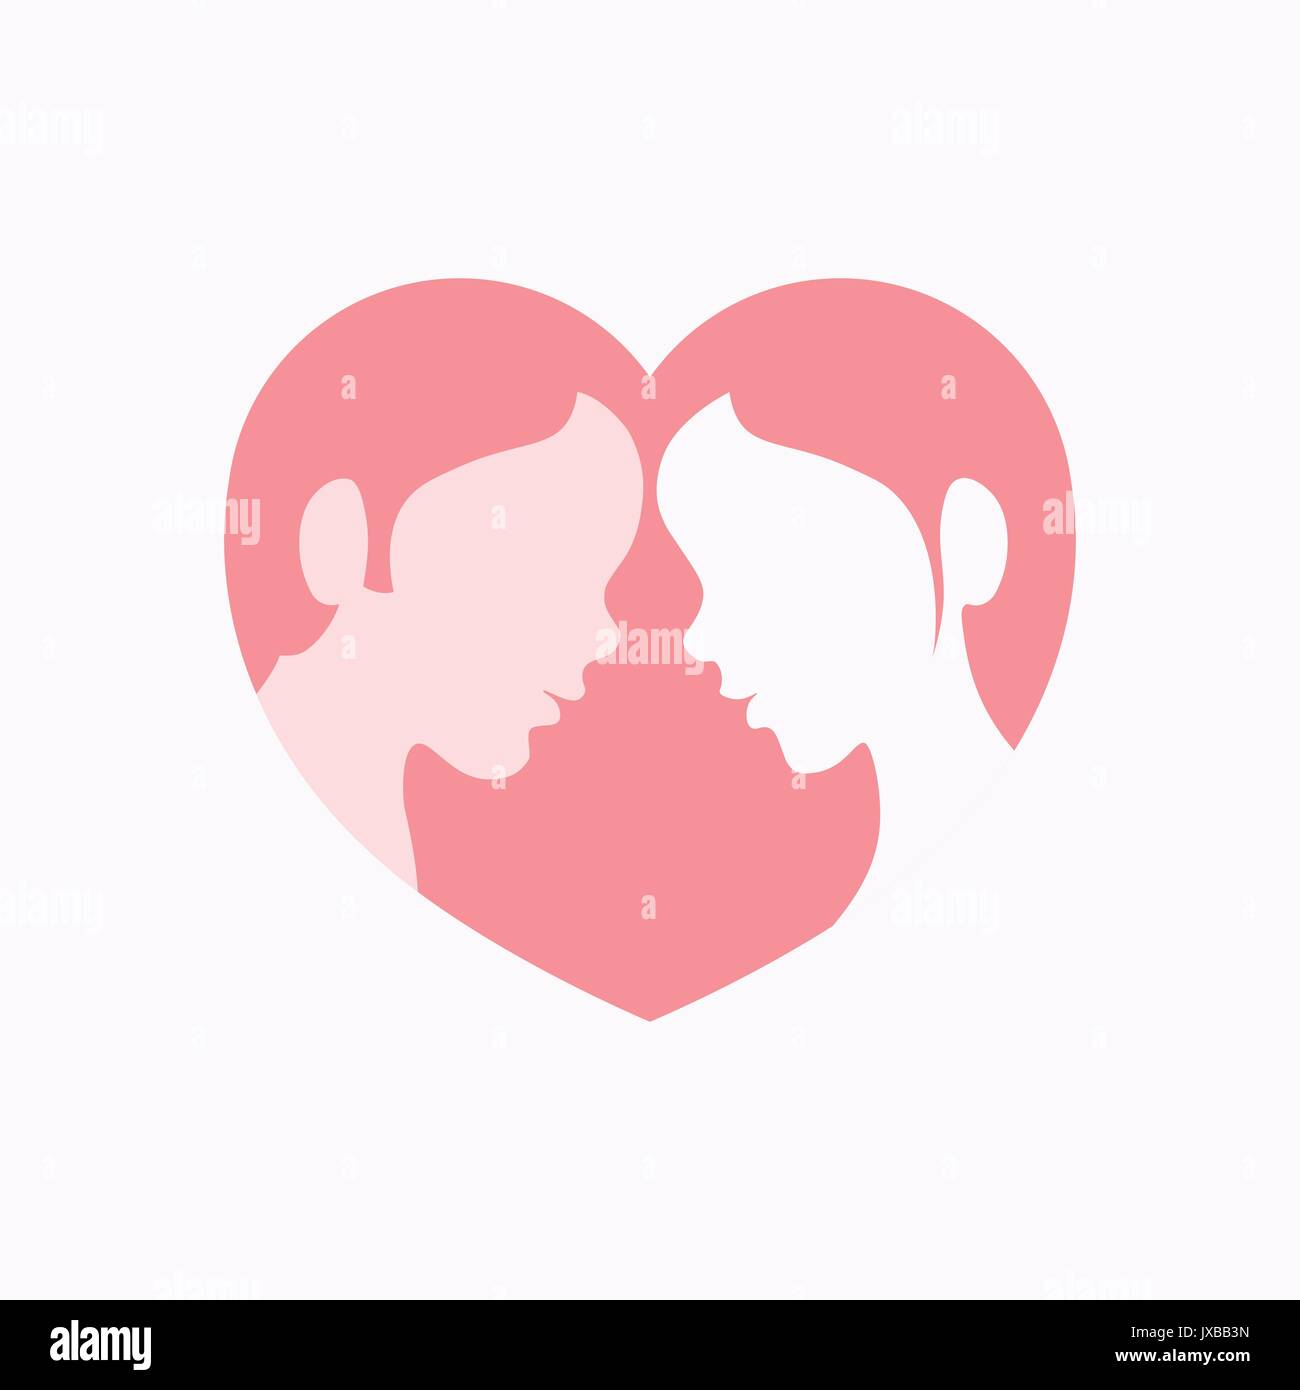 Faces of young man and woman in side view within heart shaped silhouette Stock Vector